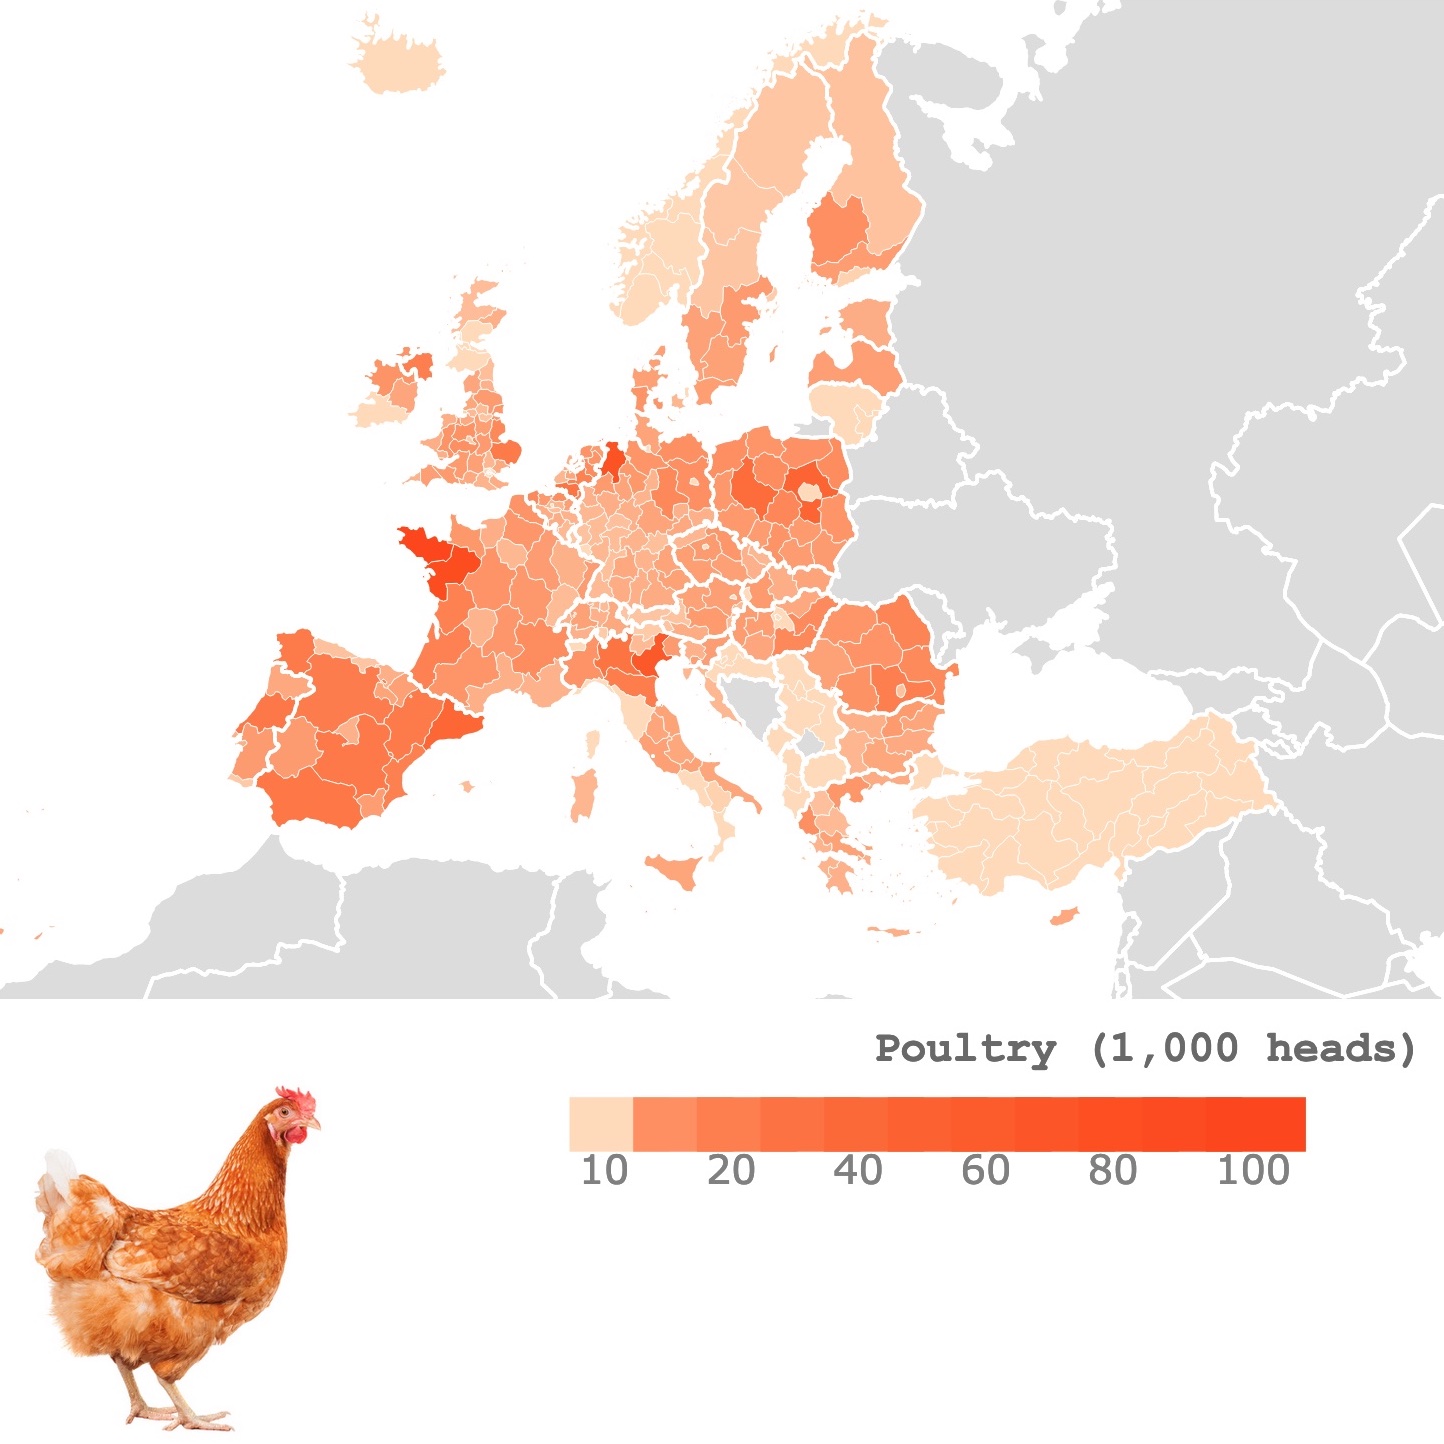 Map of Poultry Density in Europe